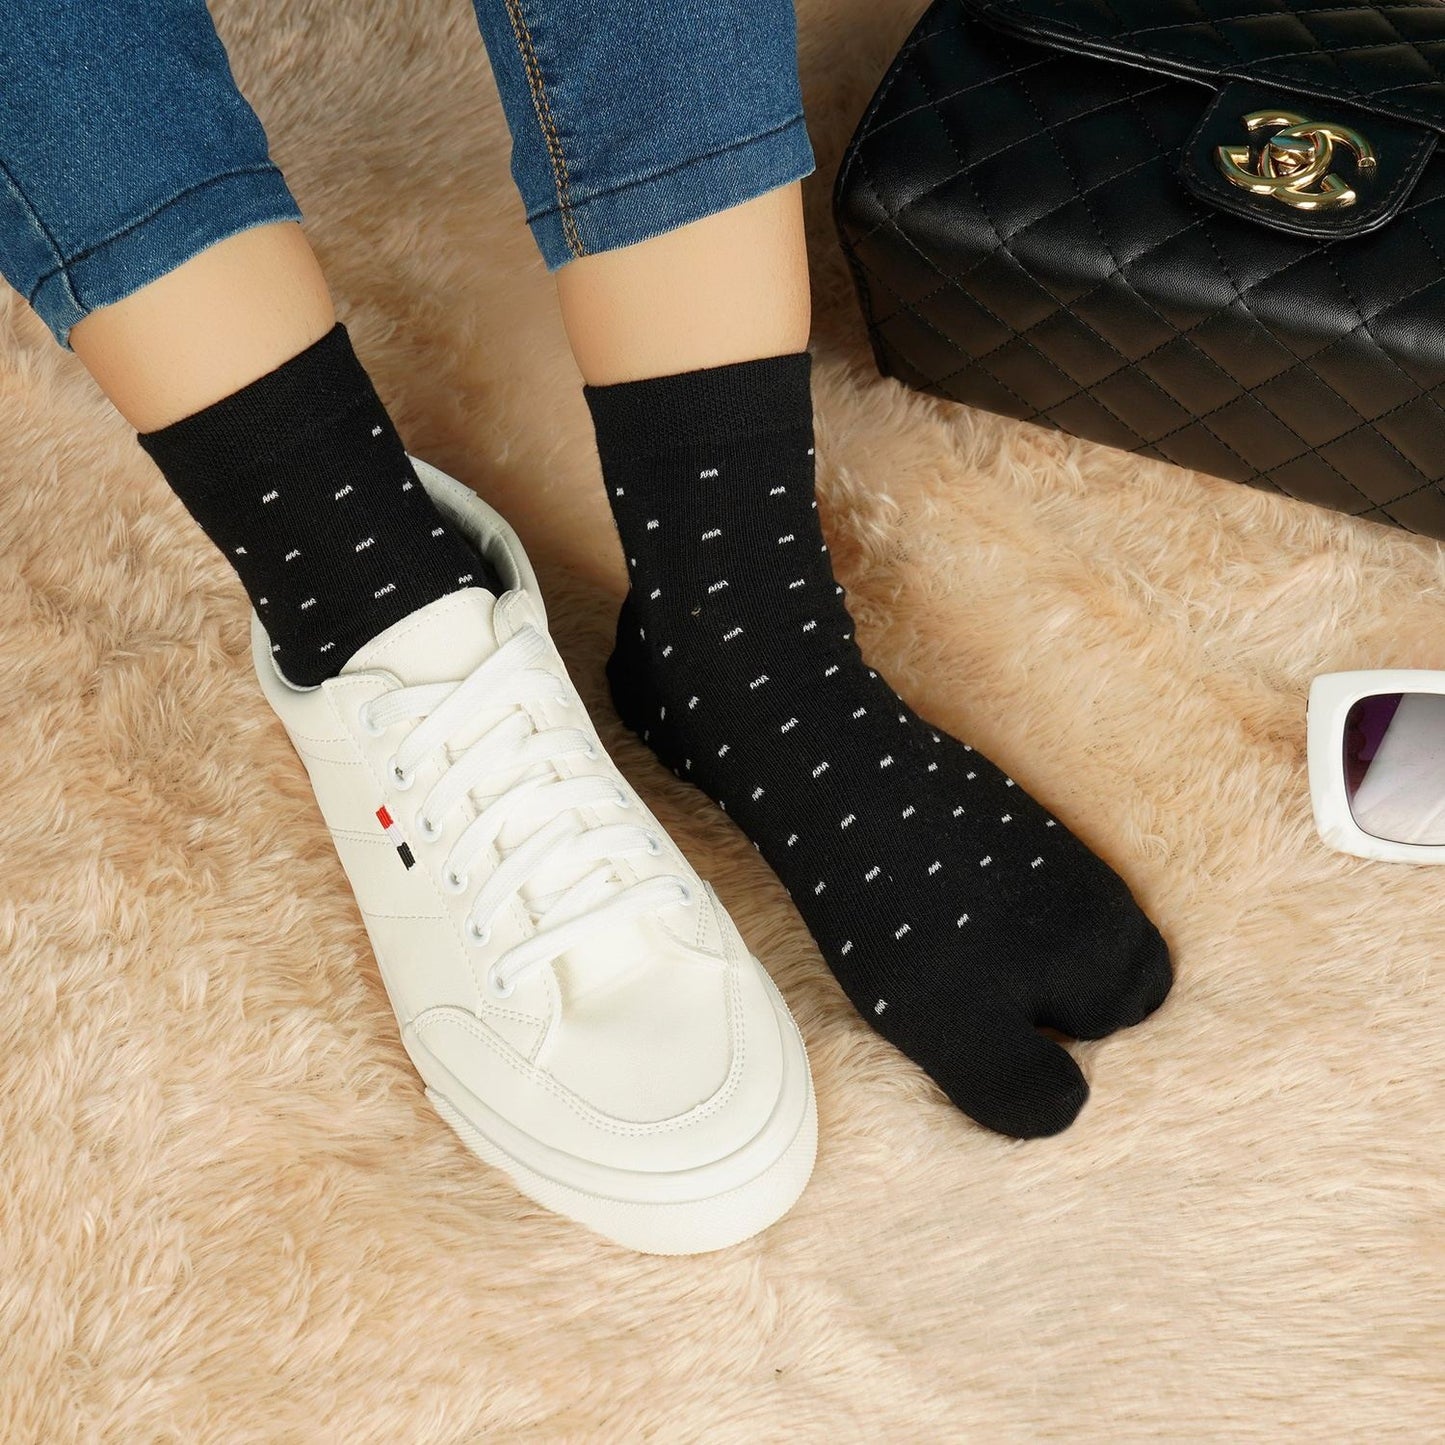 Ankle Thumb Dotted Socks (Black)